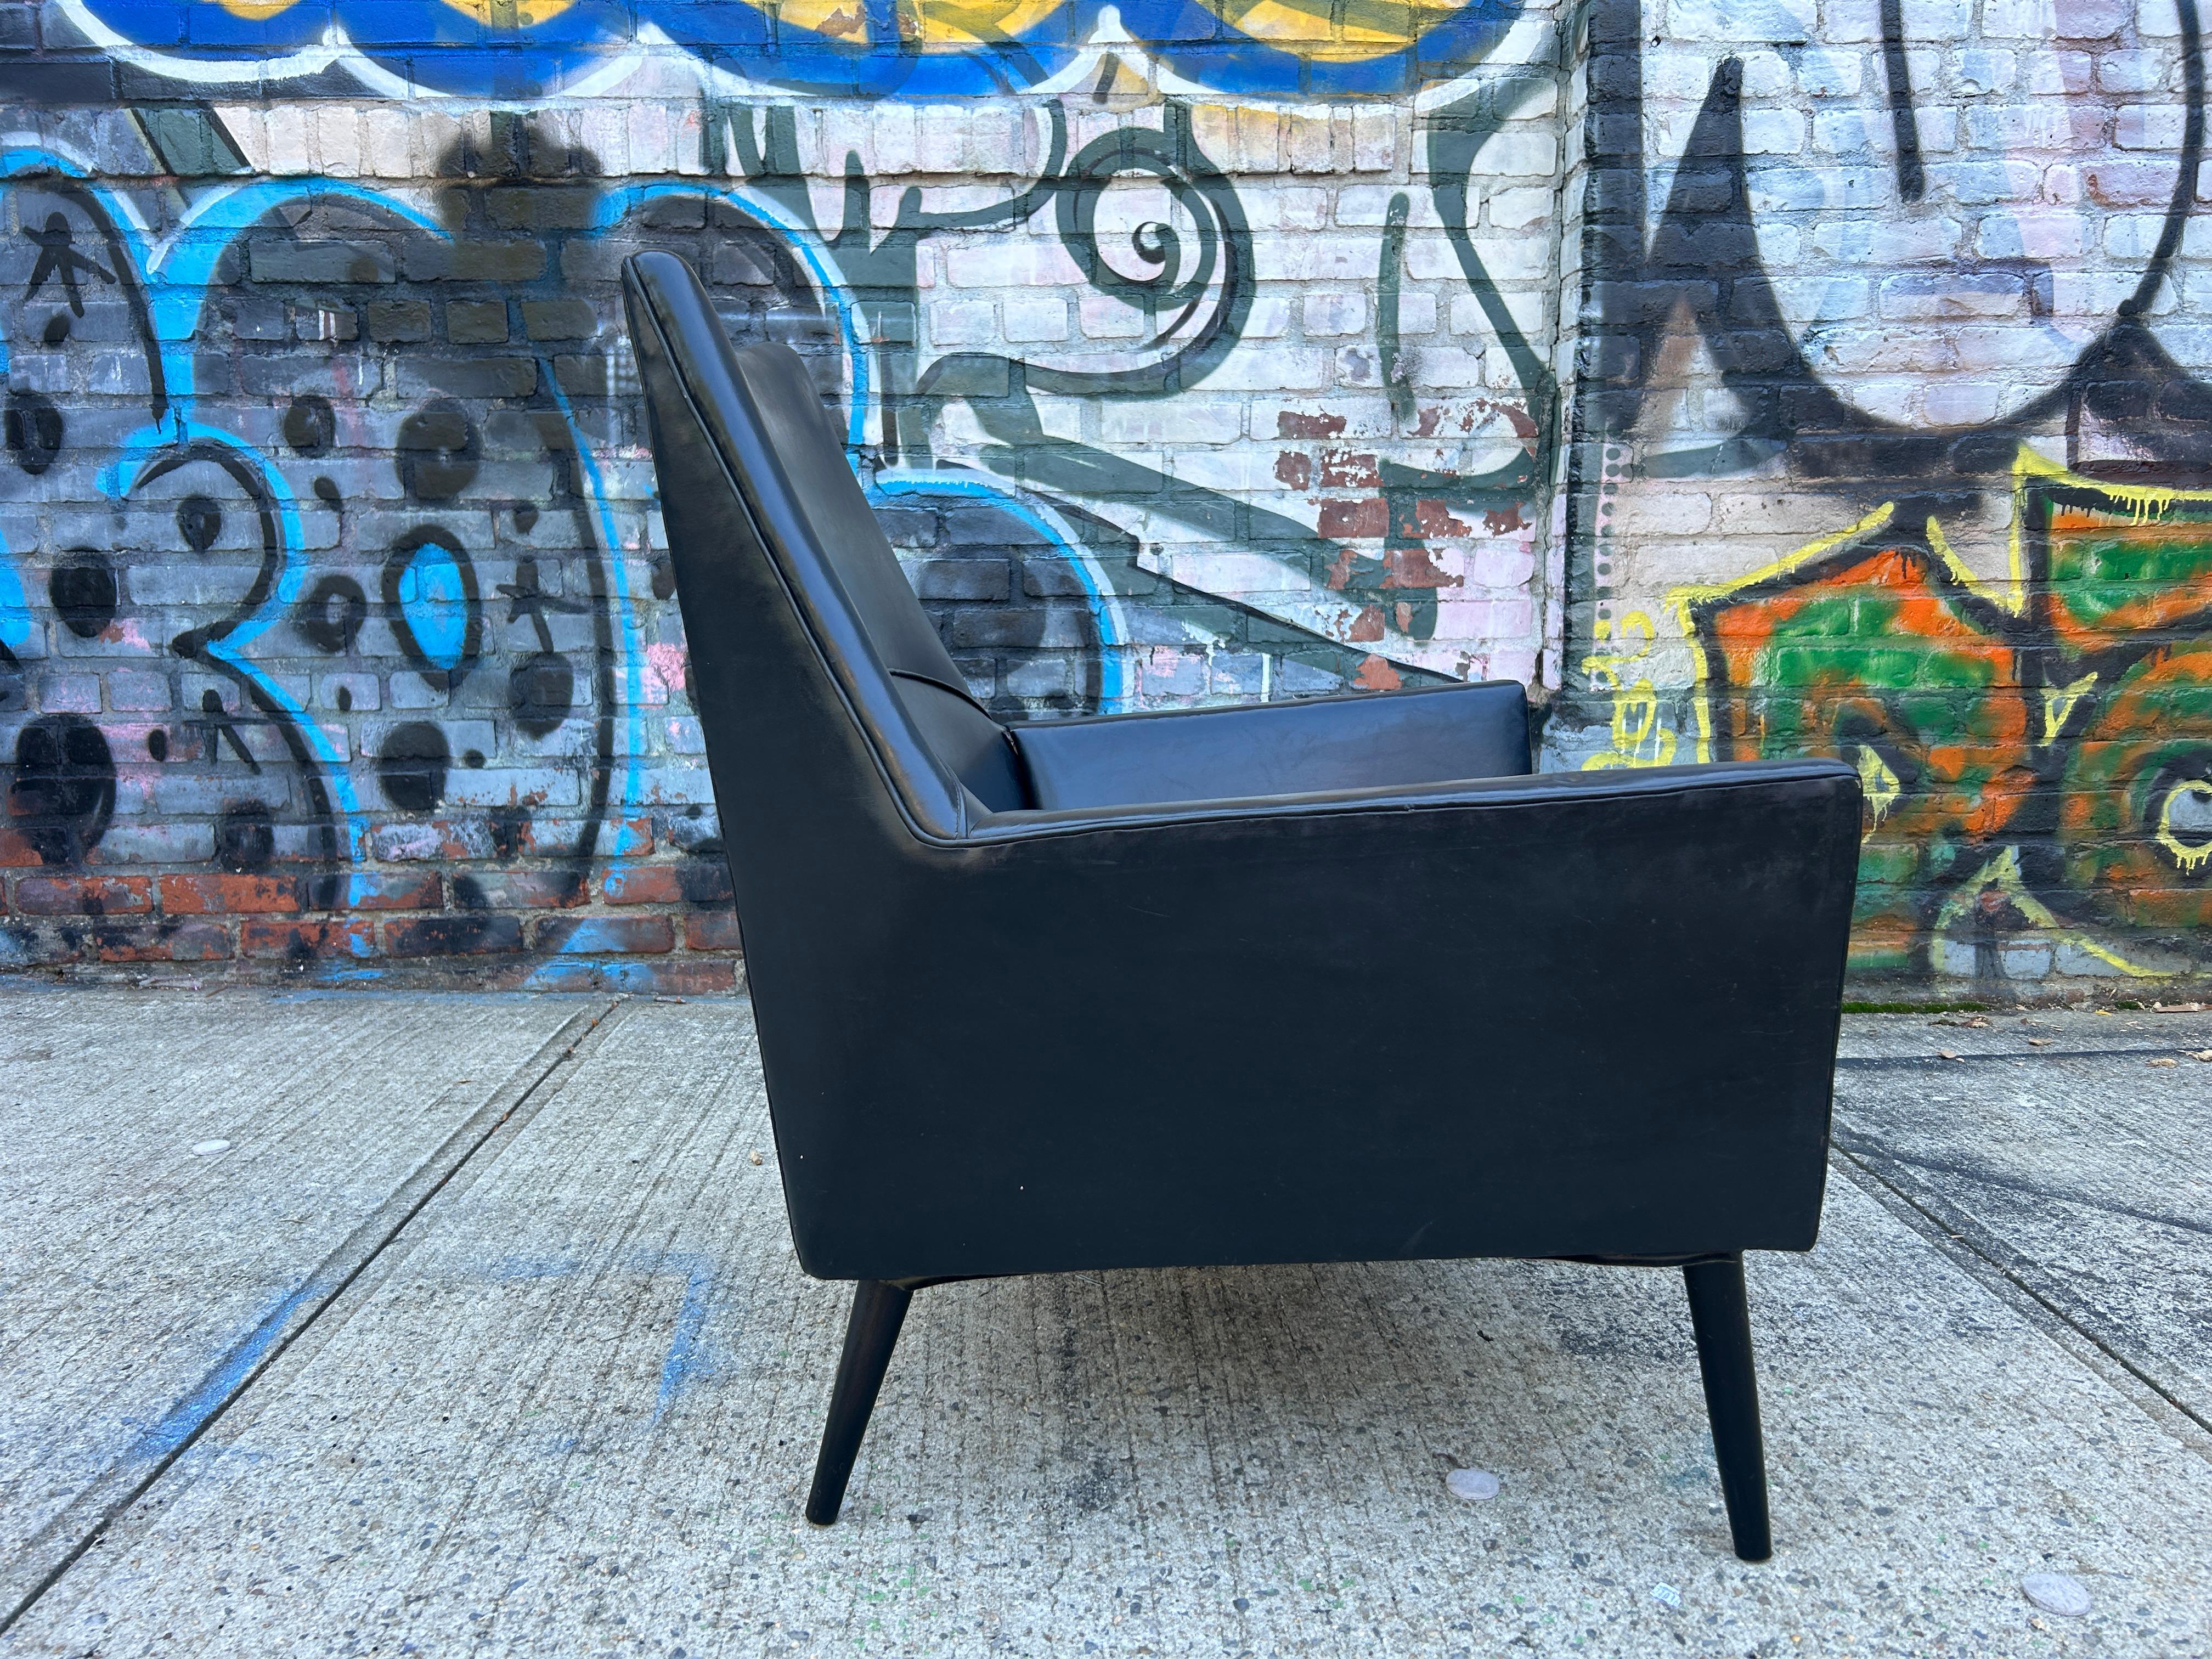 Rare mid century Paul Mccobb all Black original Squirm low geometric lounge chair. All original black Naugahyde upholstery over wood frame. Amazing geometric design great lines. Designed by American Designer Paul Mccobb. Truly a wonderful chair